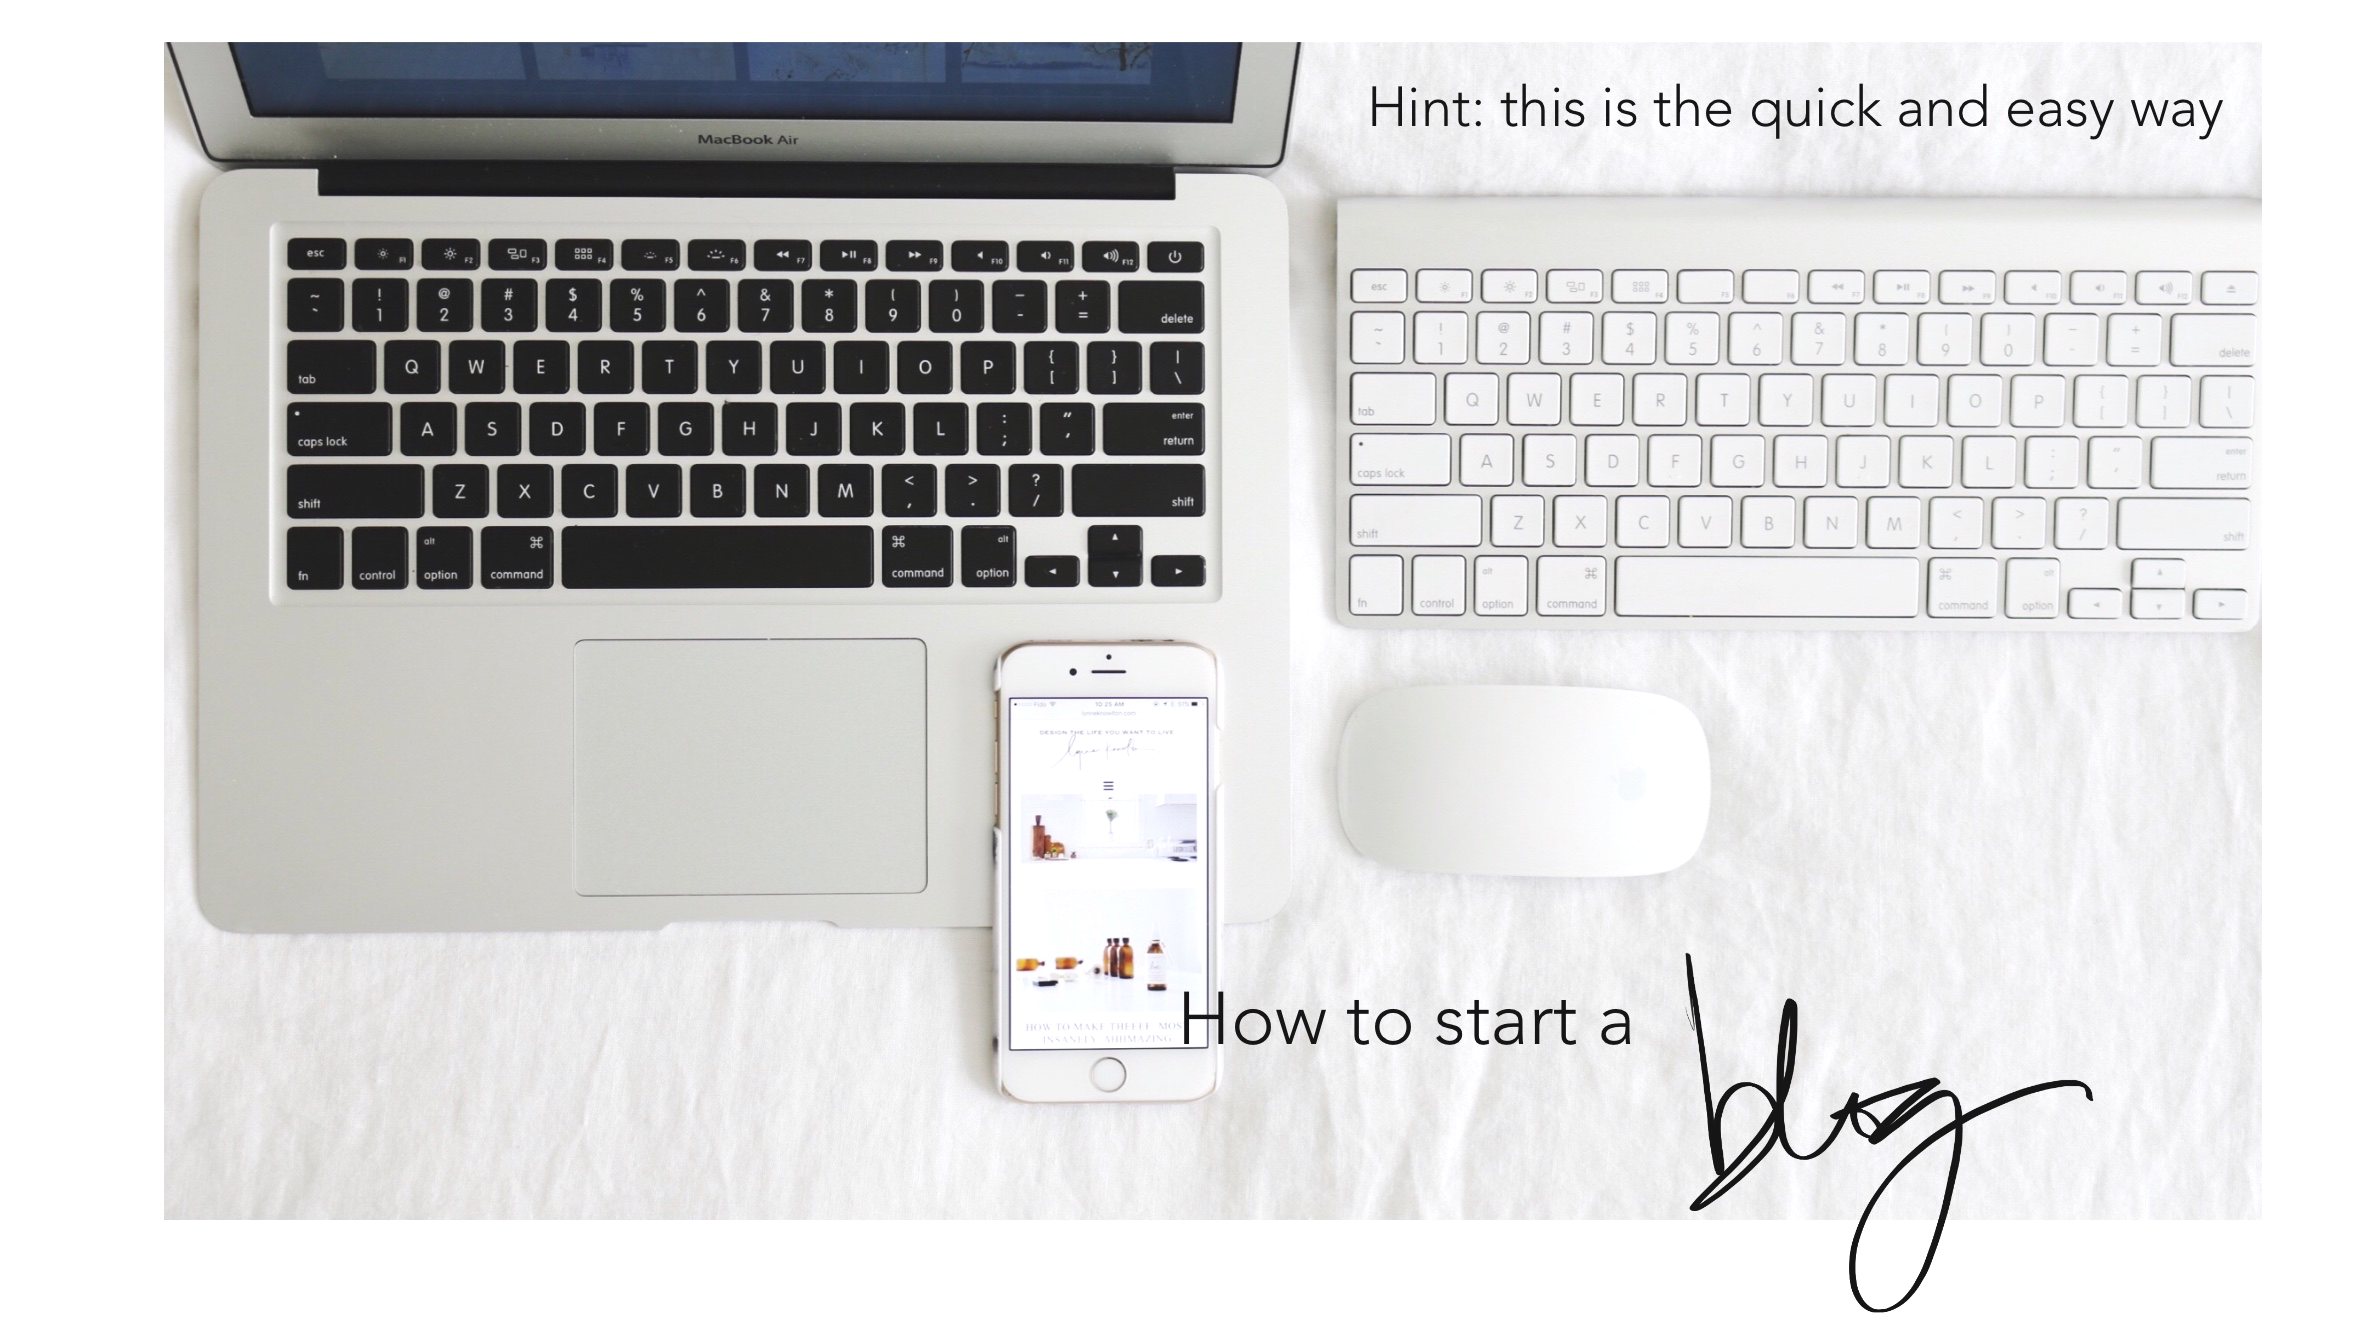 How to start a blog in 15 minutes. With WordPress. And Bluehost. And wine. And a lot of it. | DESIGN THE LIFE YOU WANT TO LIVE | Lynne Knowlton